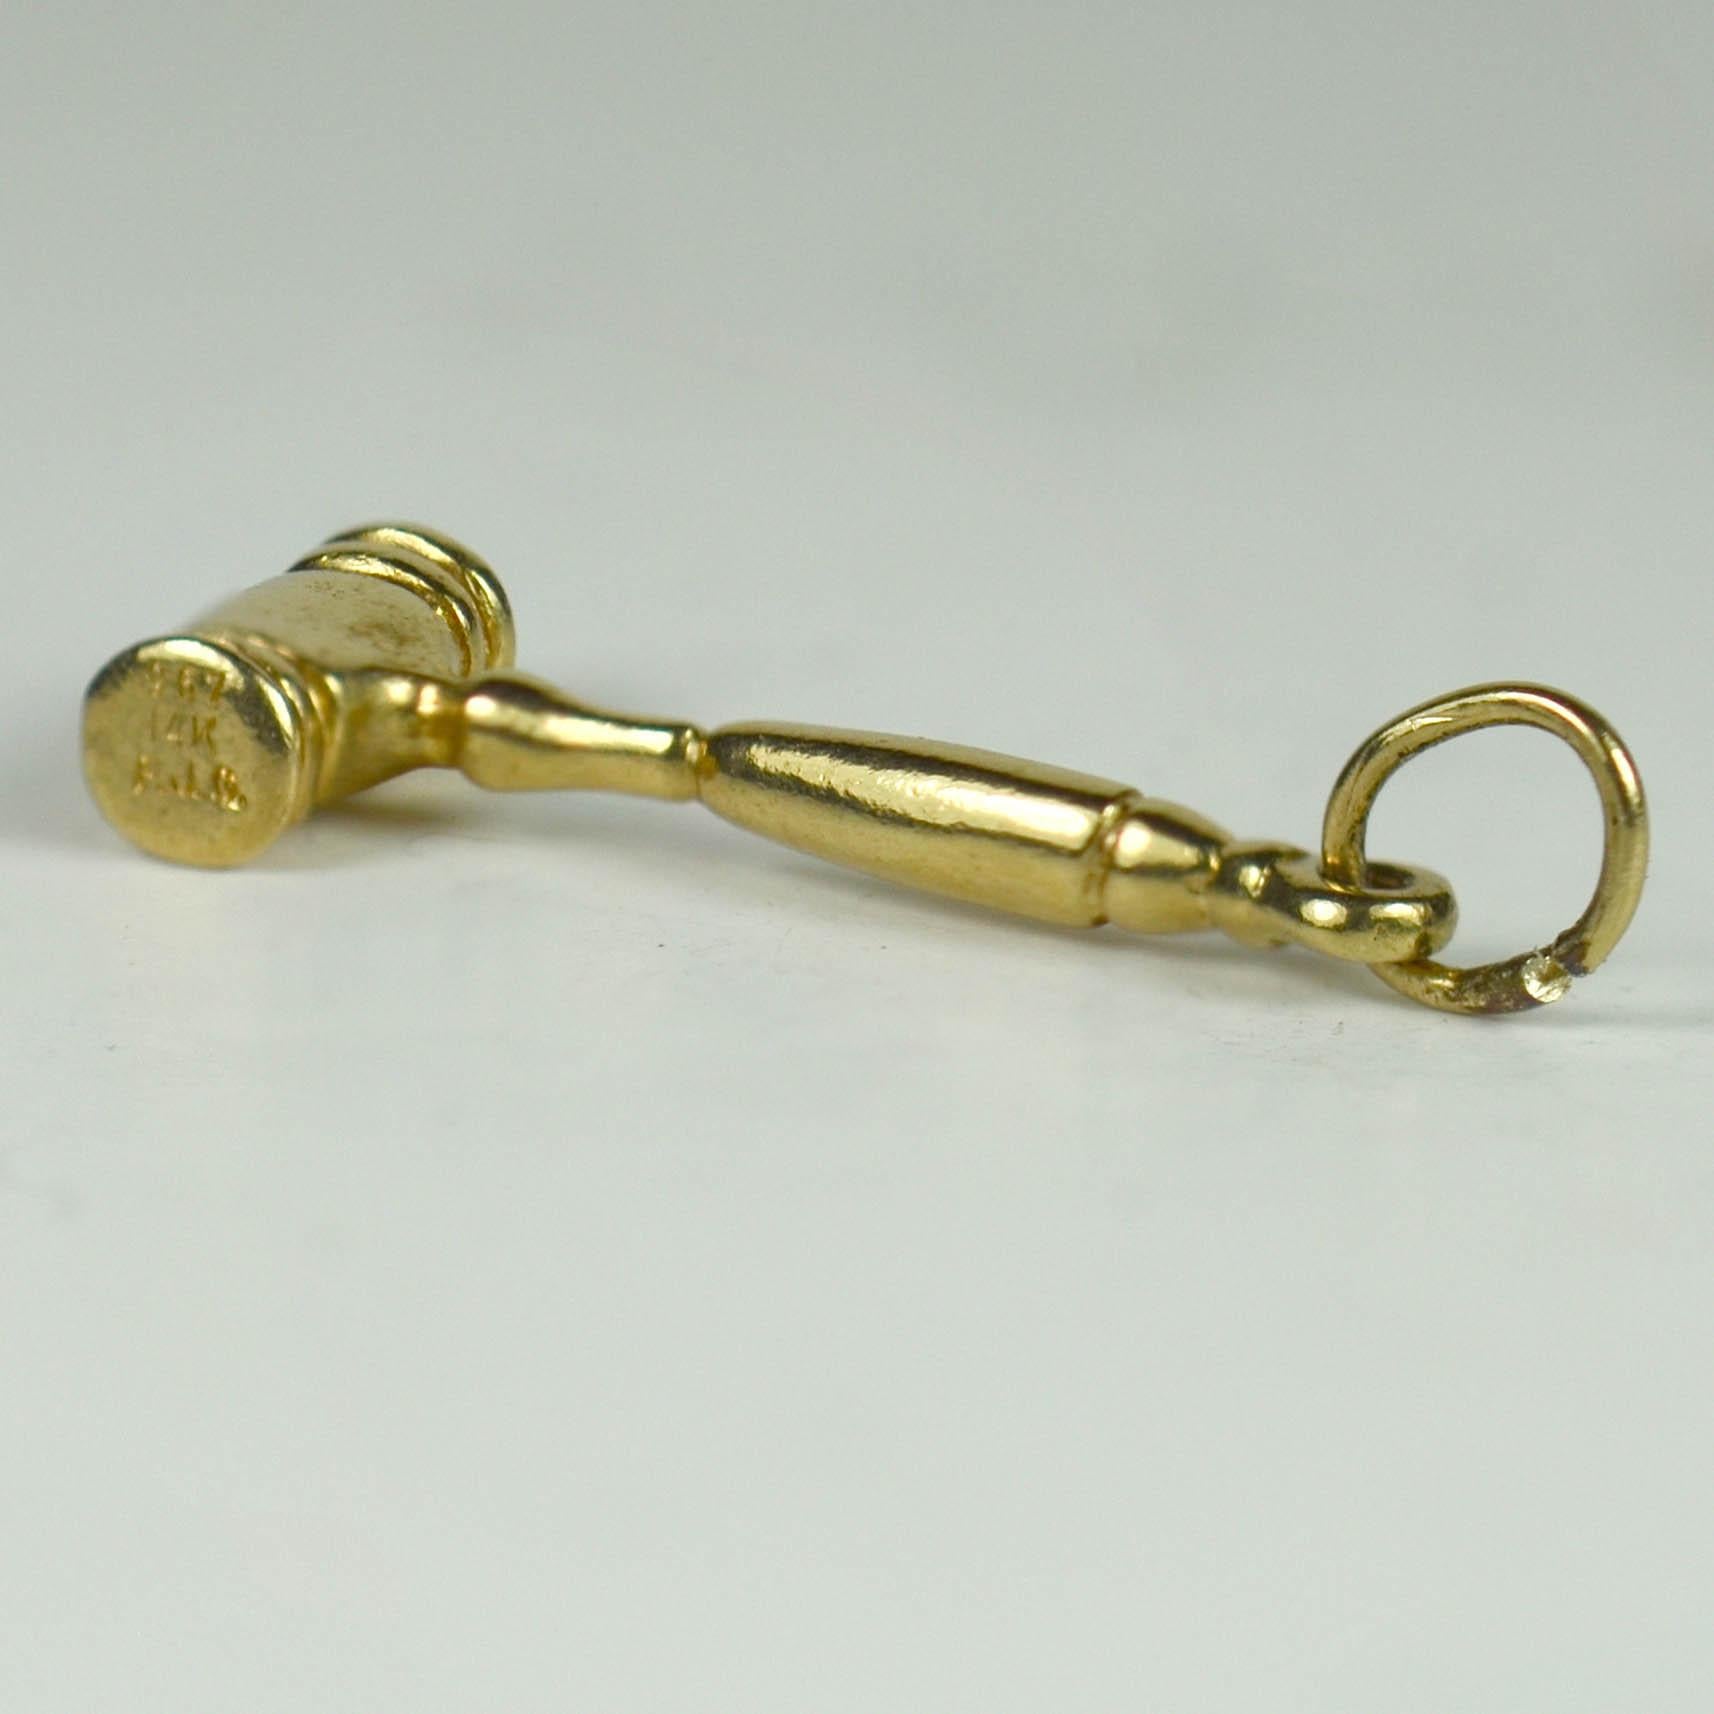 A 14 karat yellow gold charm pendant designed as an auctioneer's or lawyer's gavel (hammer). 
Marked 14K F.J.G. and numbered 967.

Dimensions: 3 x 0.9 x 0.4 cm
Weight: 2.31 grams.